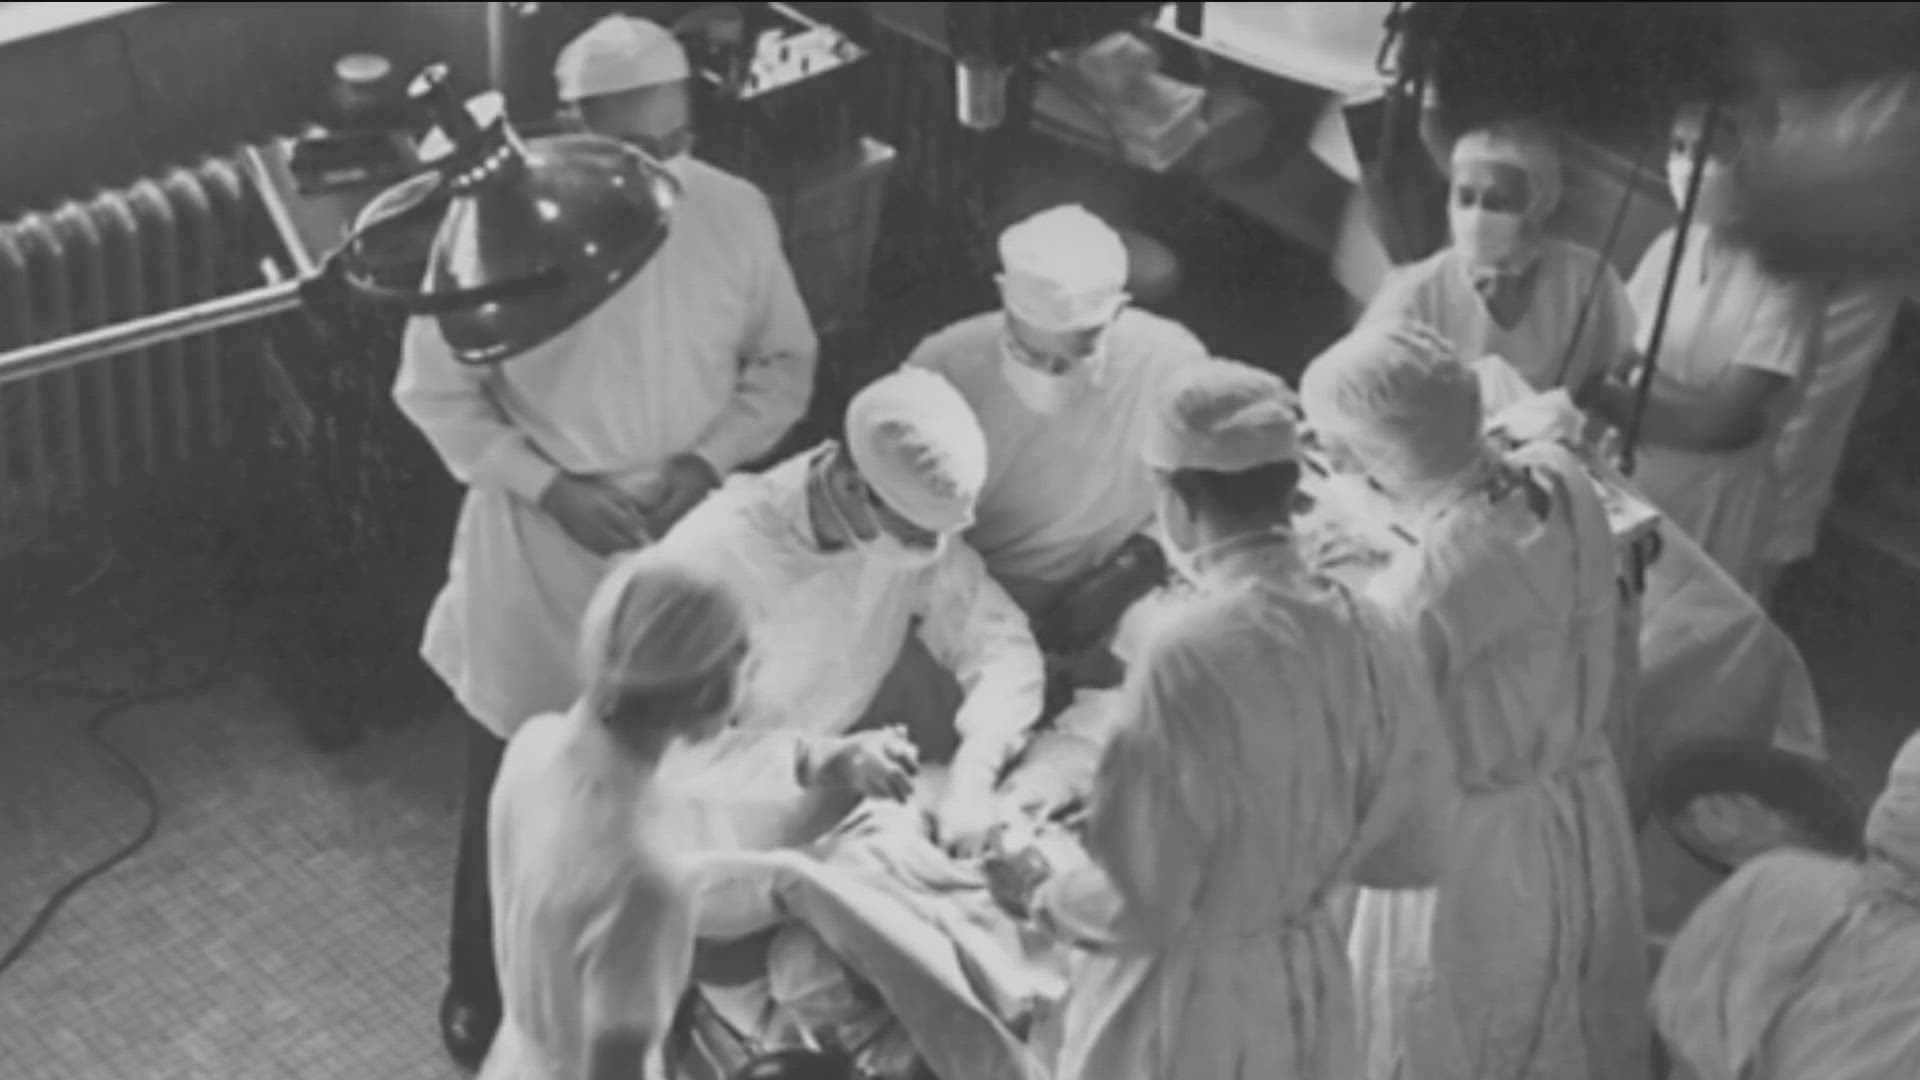 One April 4, 1969, Dr. Denton Cooley, a heart surgeon who got his early training at UT Austin accomplished what many thought could never be done.